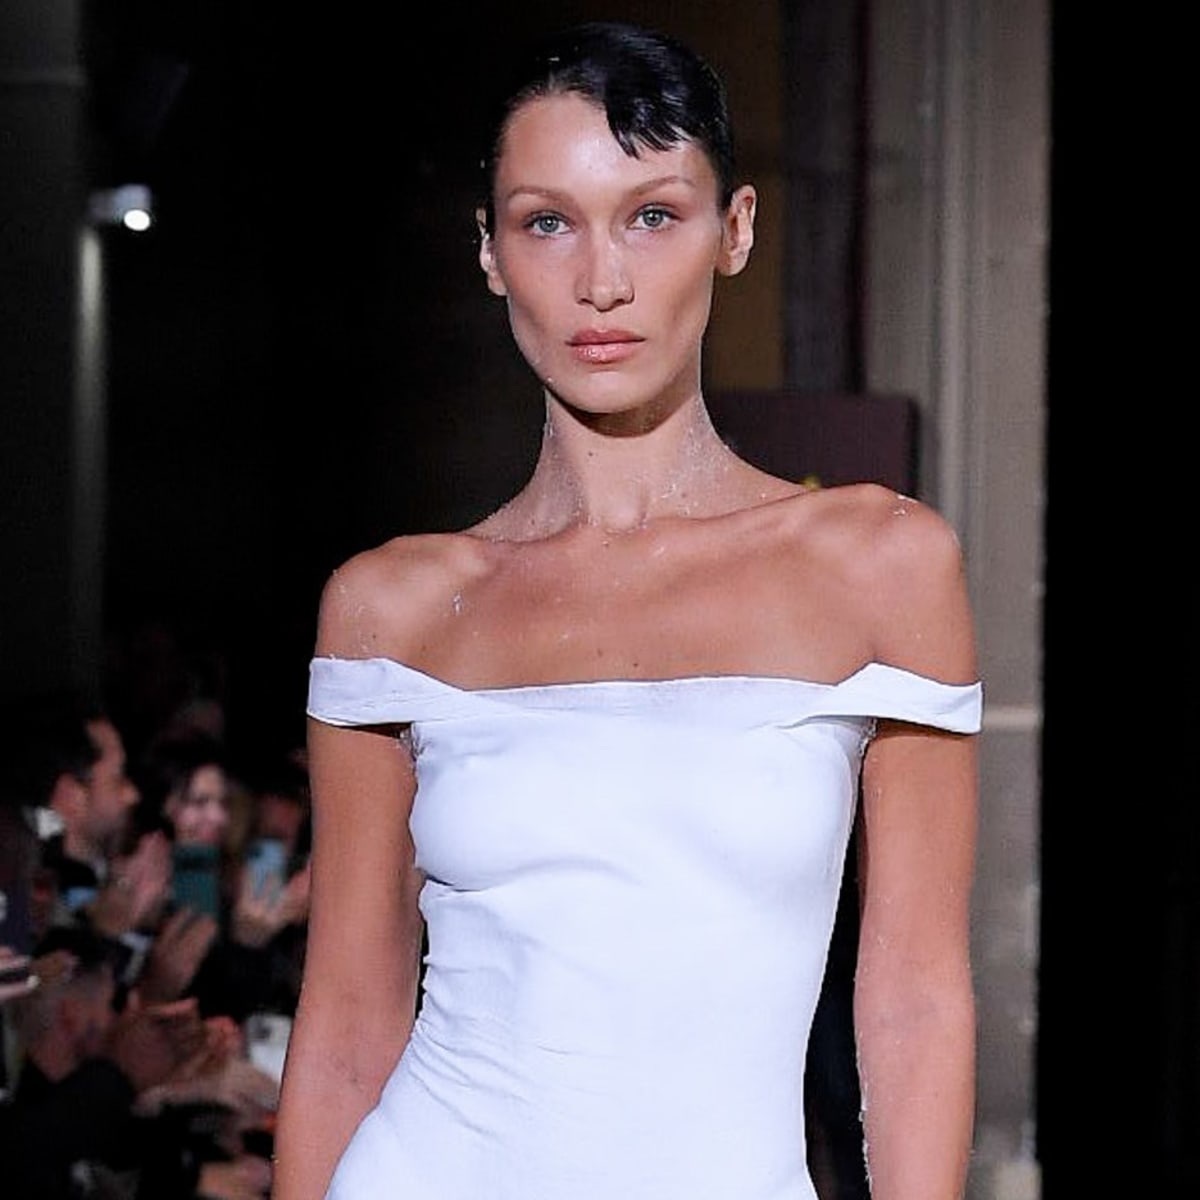 Bella Hadid Dress: Bella Hadid shuts down Paris Fashion Week with  'futuristic' dress. Video shows how sleek gown was spray-painted on  supermodel - The Economic Times